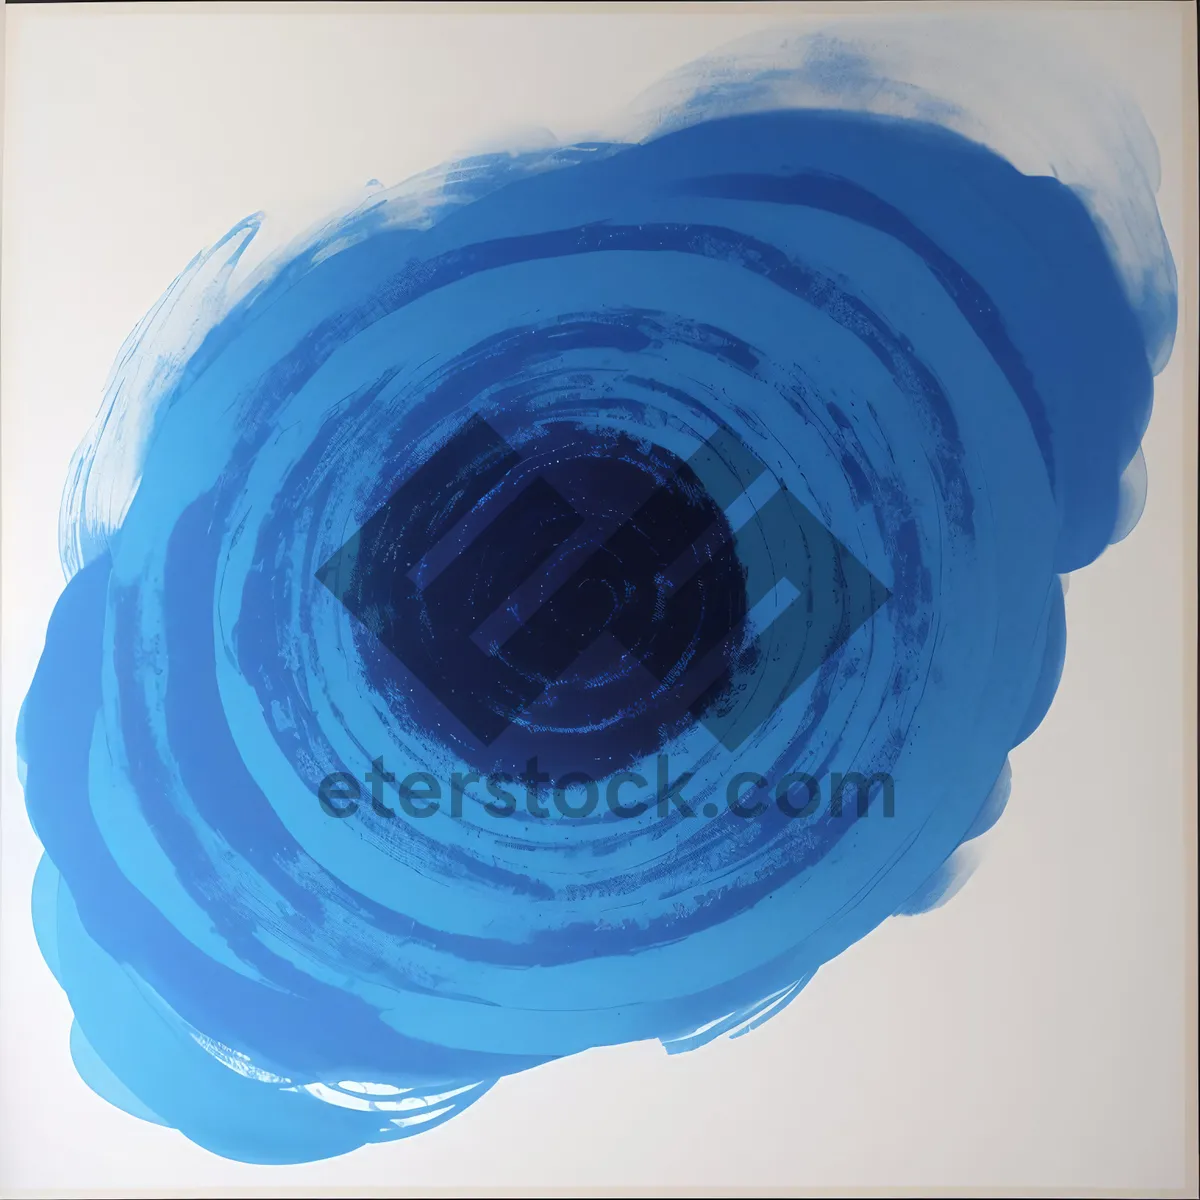 Picture of Fluid Circles: Dynamic Water Splash Design